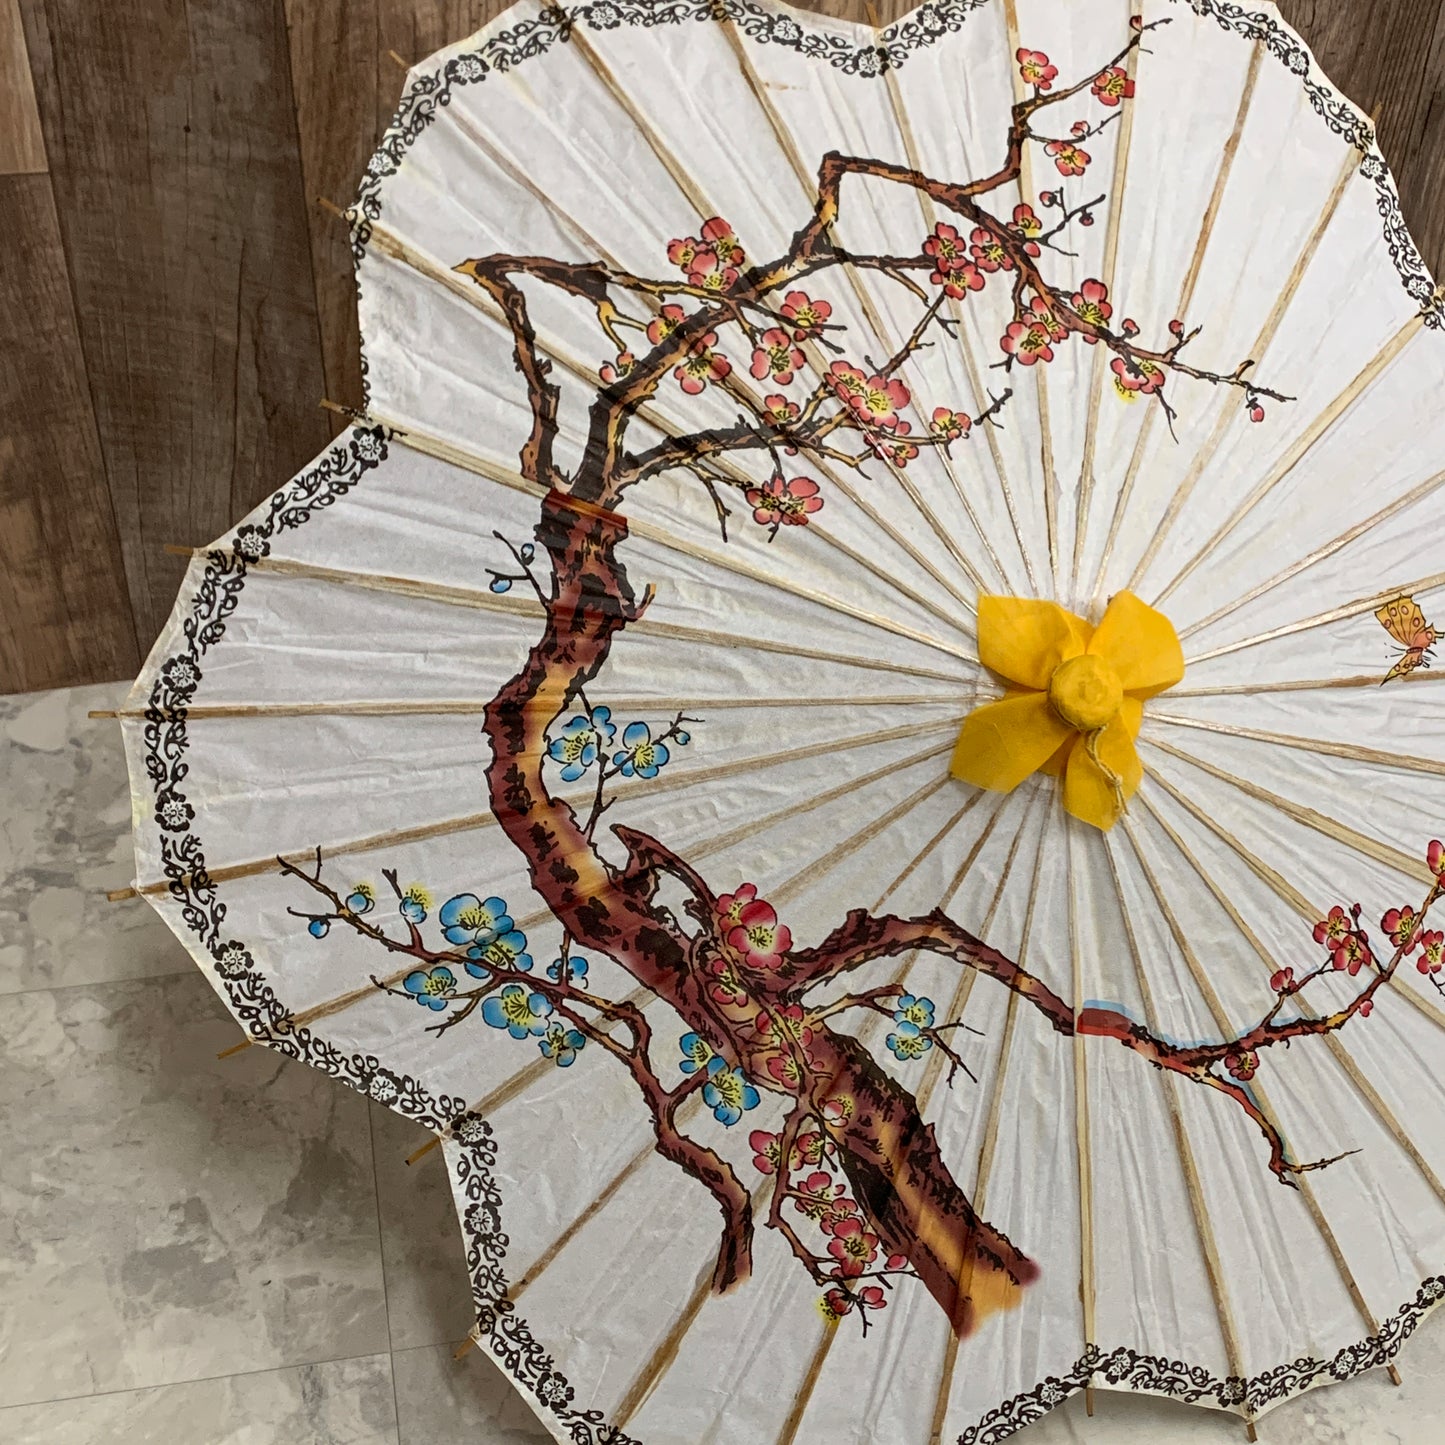 Vintage Rice Paper Parasol with Cherry Blossom Design and Scalloped Edge